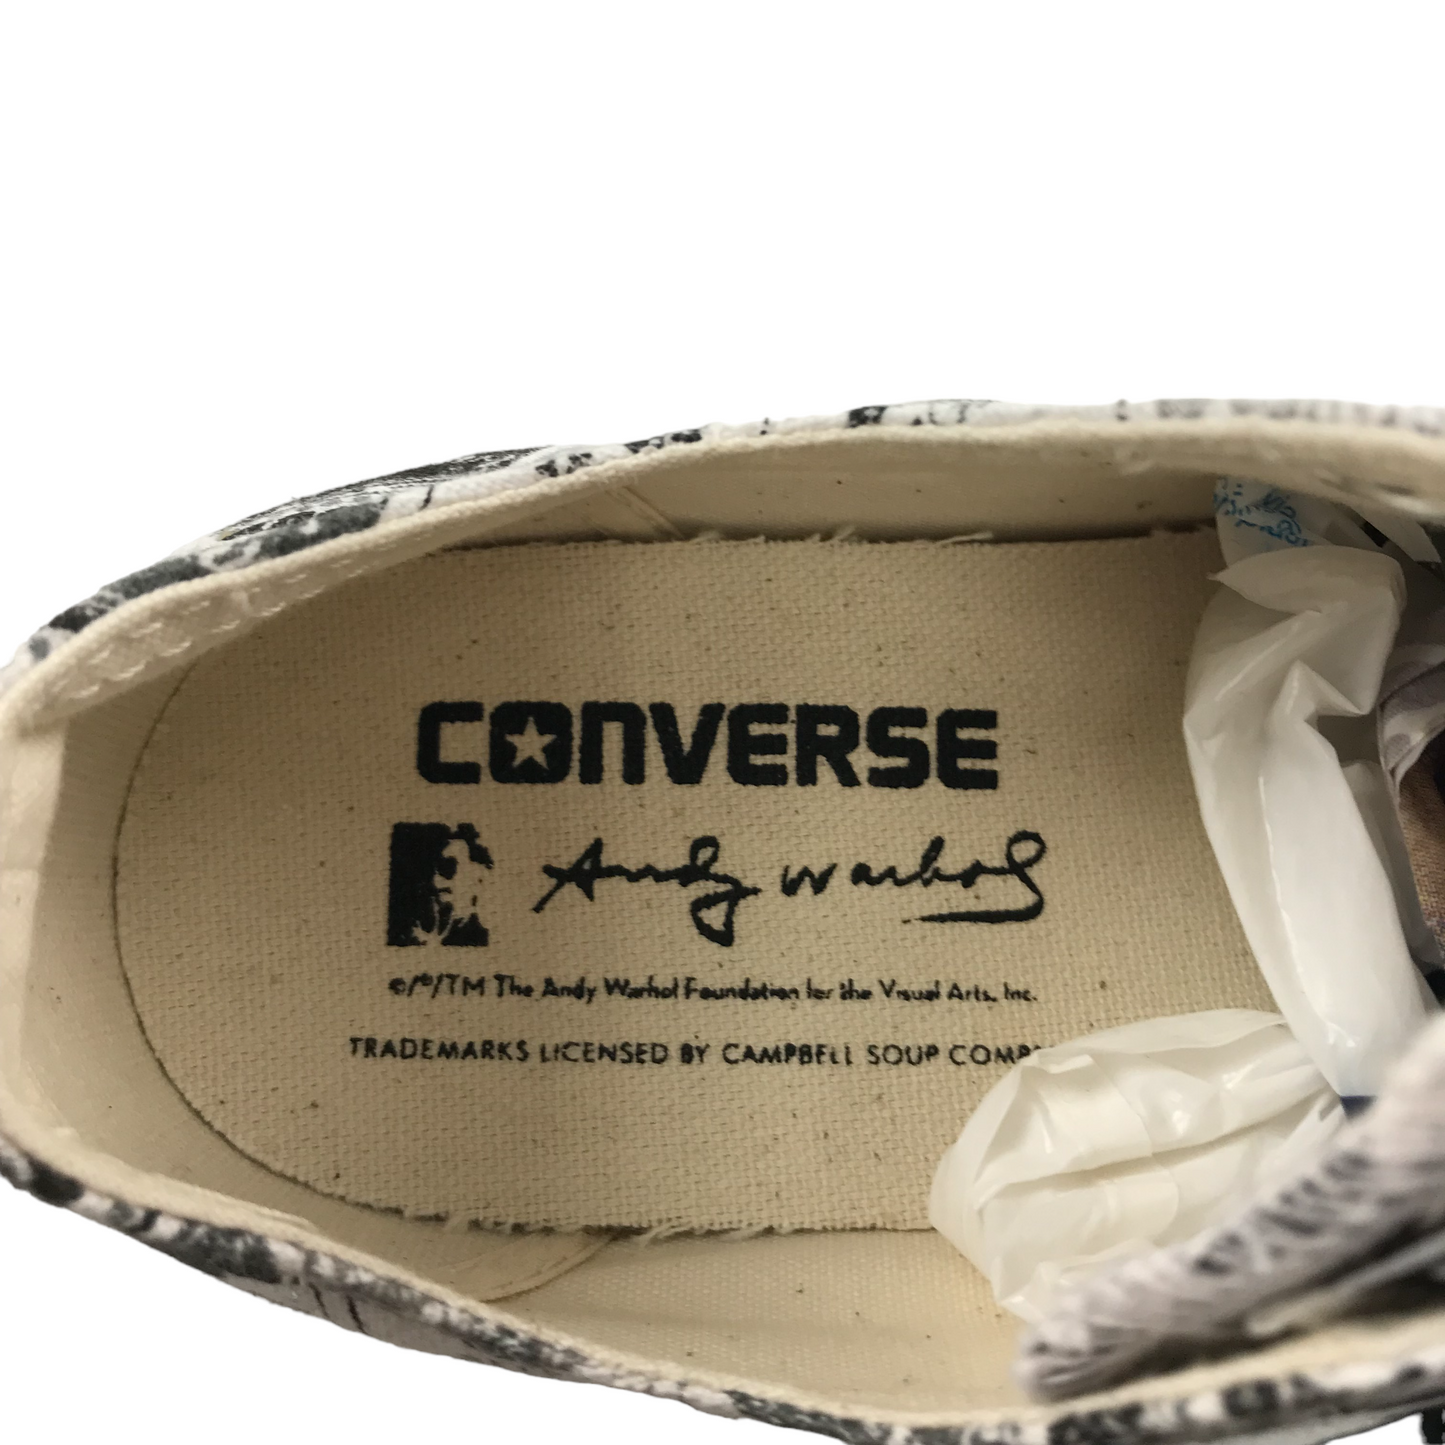 Converse All Star Andy Warhol Soup Tin Trainers Shoe Size 6 Black and White Chuck Taylor